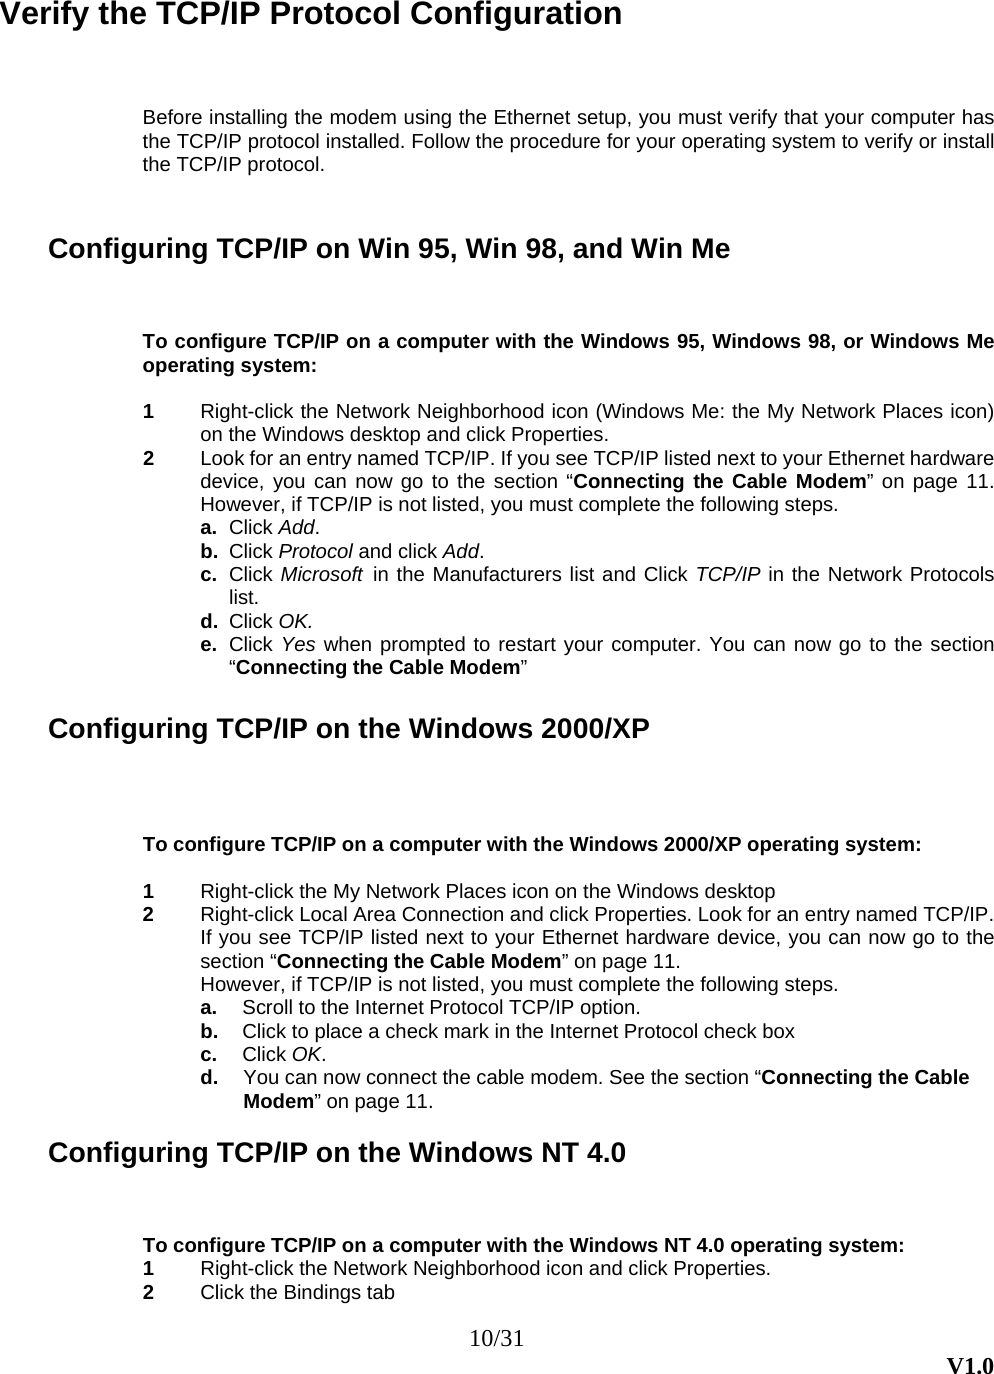 10/31  V1.0 Verify the TCP/IP Protocol Configuration Before installing the modem using the Ethernet setup, you must verify that your computer has the TCP/IP protocol installed. Follow the procedure for your operating system to verify or install the TCP/IP protocol.   Configuring TCP/IP on Win 95, Win 98, and Win Me To configure TCP/IP on a computer with the Windows 95, Windows 98, or Windows Me operating system:   1  Right-click the Network Neighborhood icon (Windows Me: the My Network Places icon) on the Windows desktop and click Properties. 2  Look for an entry named TCP/IP. If you see TCP/IP listed next to your Ethernet hardware device, you can now go to the section “Connecting the Cable Modem” on page 11. However, if TCP/IP is not listed, you must complete the following steps. a.  Click Add. b.  Click Protocol and click Add. c.  Click Microsoft  in the Manufacturers list and Click TCP/IP in the Network Protocols list. d.  Click OK. e.  Click Yes when prompted to restart your computer. You can now go to the section “Connecting the Cable Modem”    Configuring TCP/IP on the Windows 2000/XP  To configure TCP/IP on a computer with the Windows 2000/XP operating system:  1  Right-click the My Network Places icon on the Windows desktop 2  Right-click Local Area Connection and click Properties. Look for an entry named TCP/IP. If you see TCP/IP listed next to your Ethernet hardware device, you can now go to the section “Connecting the Cable Modem” on page 11. However, if TCP/IP is not listed, you must complete the following steps. a.  Scroll to the Internet Protocol TCP/IP option. b.  Click to place a check mark in the Internet Protocol check box c.  Click OK. d.  You can now connect the cable modem. See the section “Connecting the Cable Modem” on page 11.  Configuring TCP/IP on the Windows NT 4.0   To configure TCP/IP on a computer with the Windows NT 4.0 operating system: 1  Right-click the Network Neighborhood icon and click Properties. 2  Click the Bindings tab 